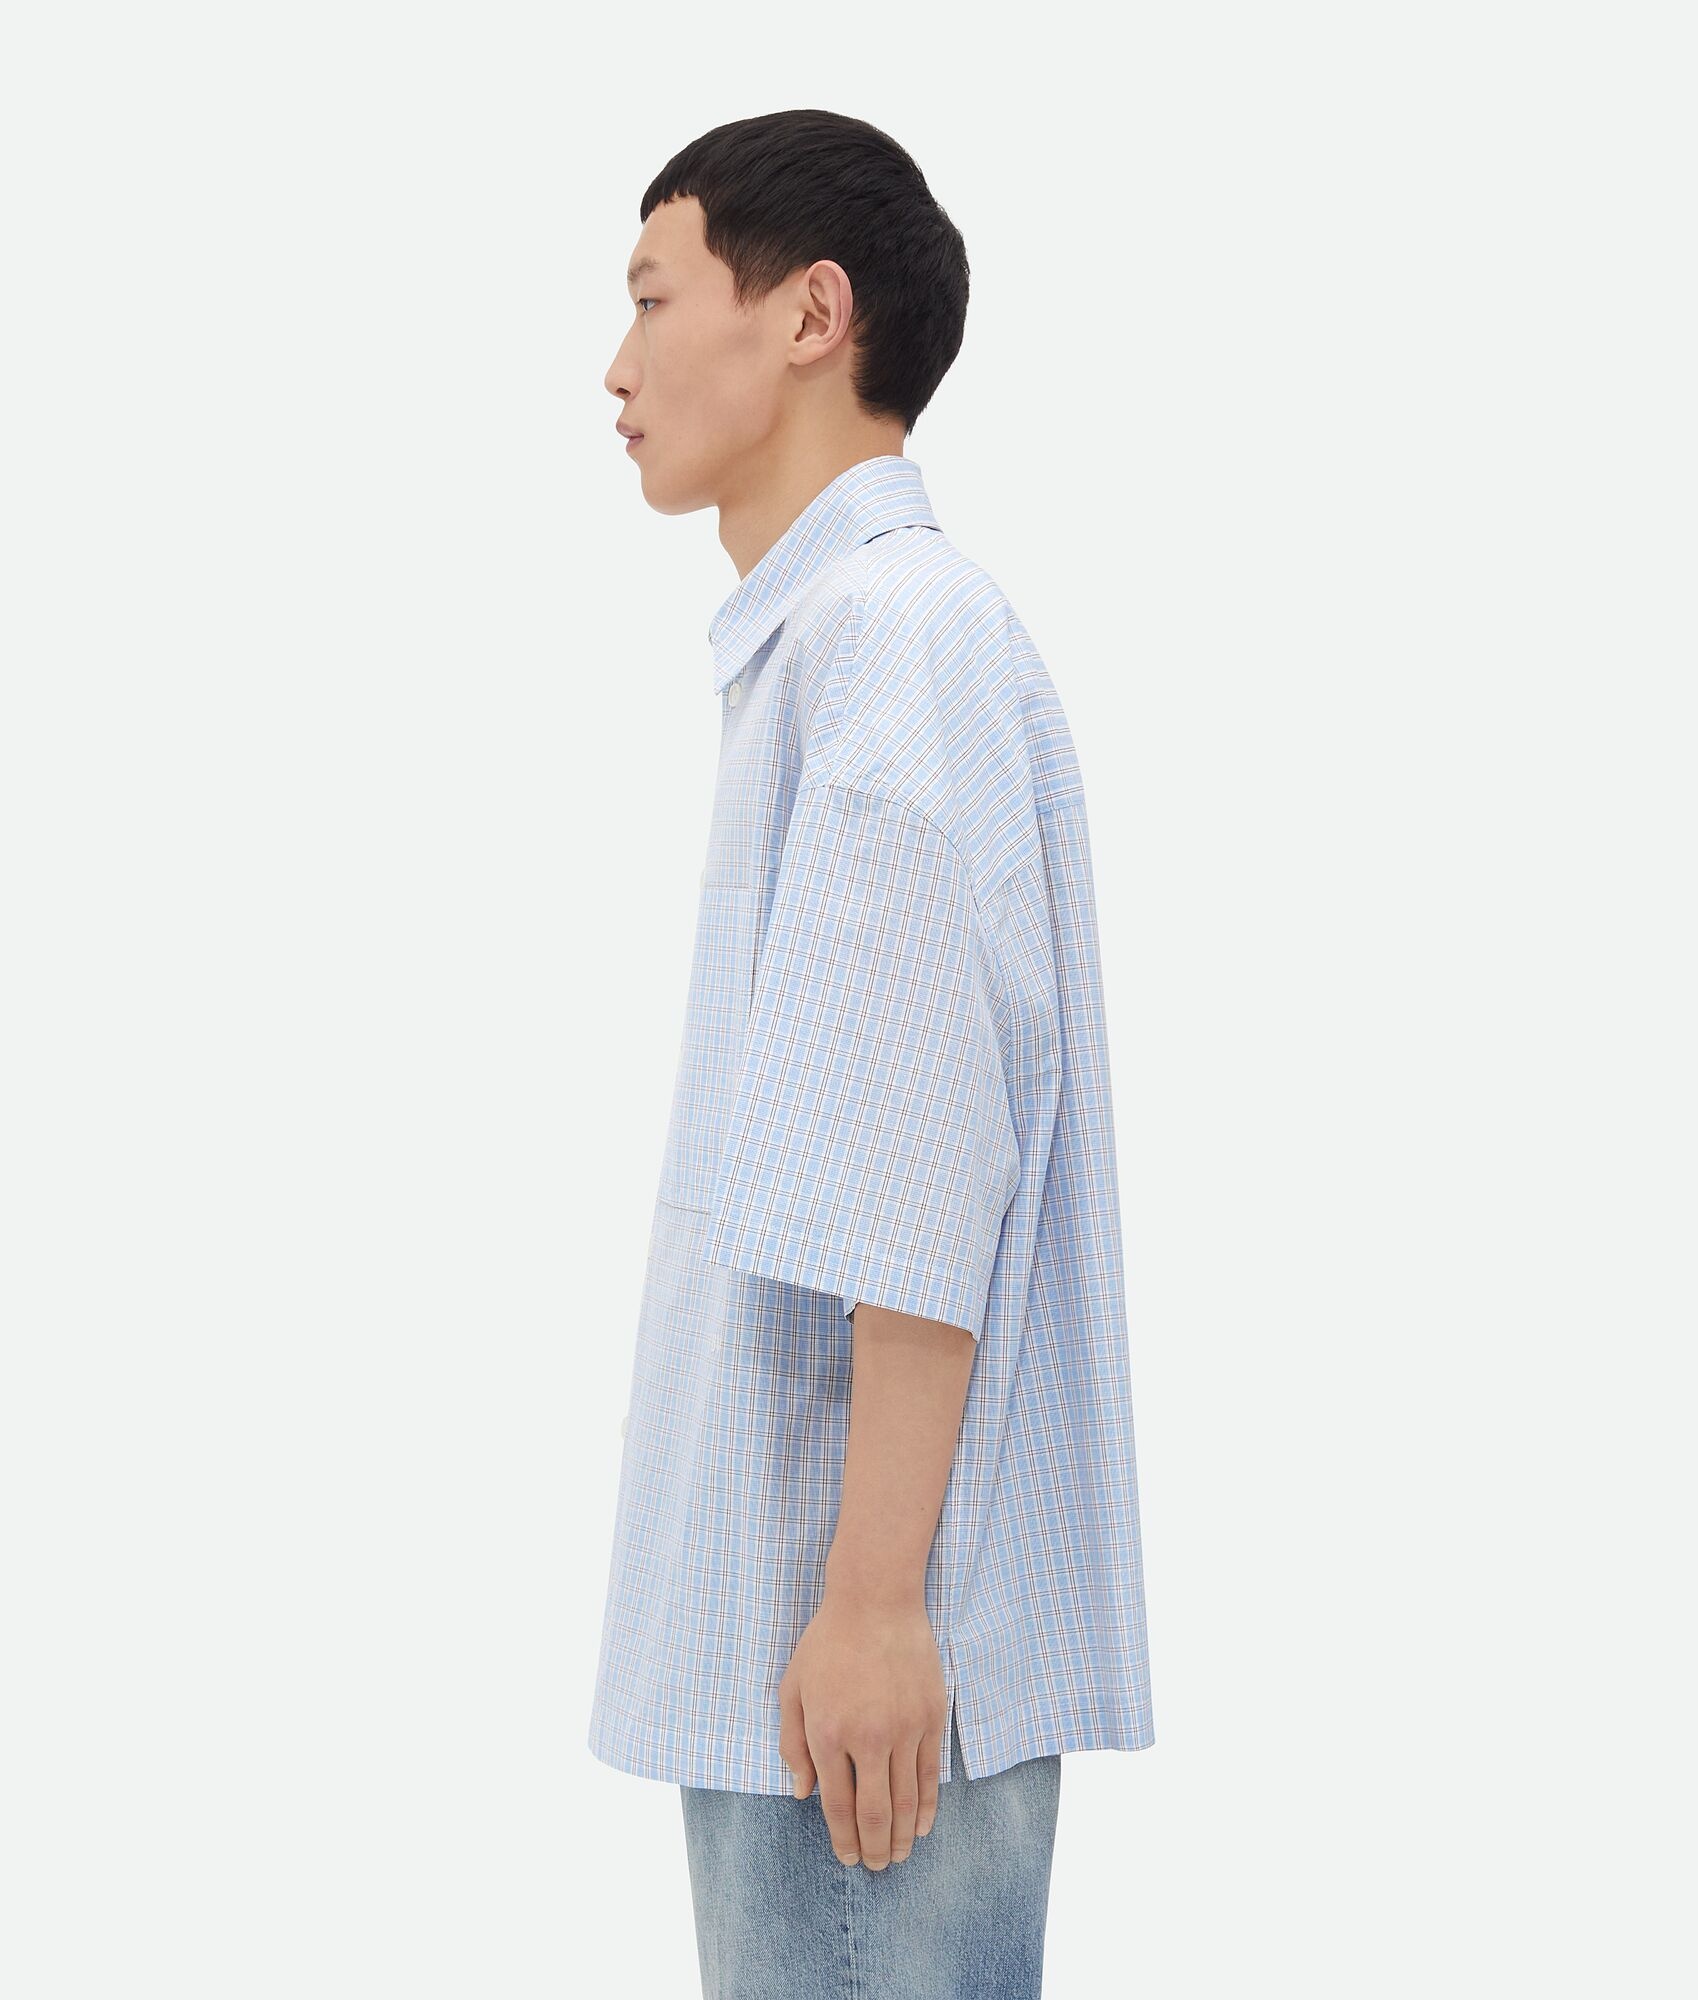 Cotton Linen Check Overshirt With "BV" Embroidery - 2